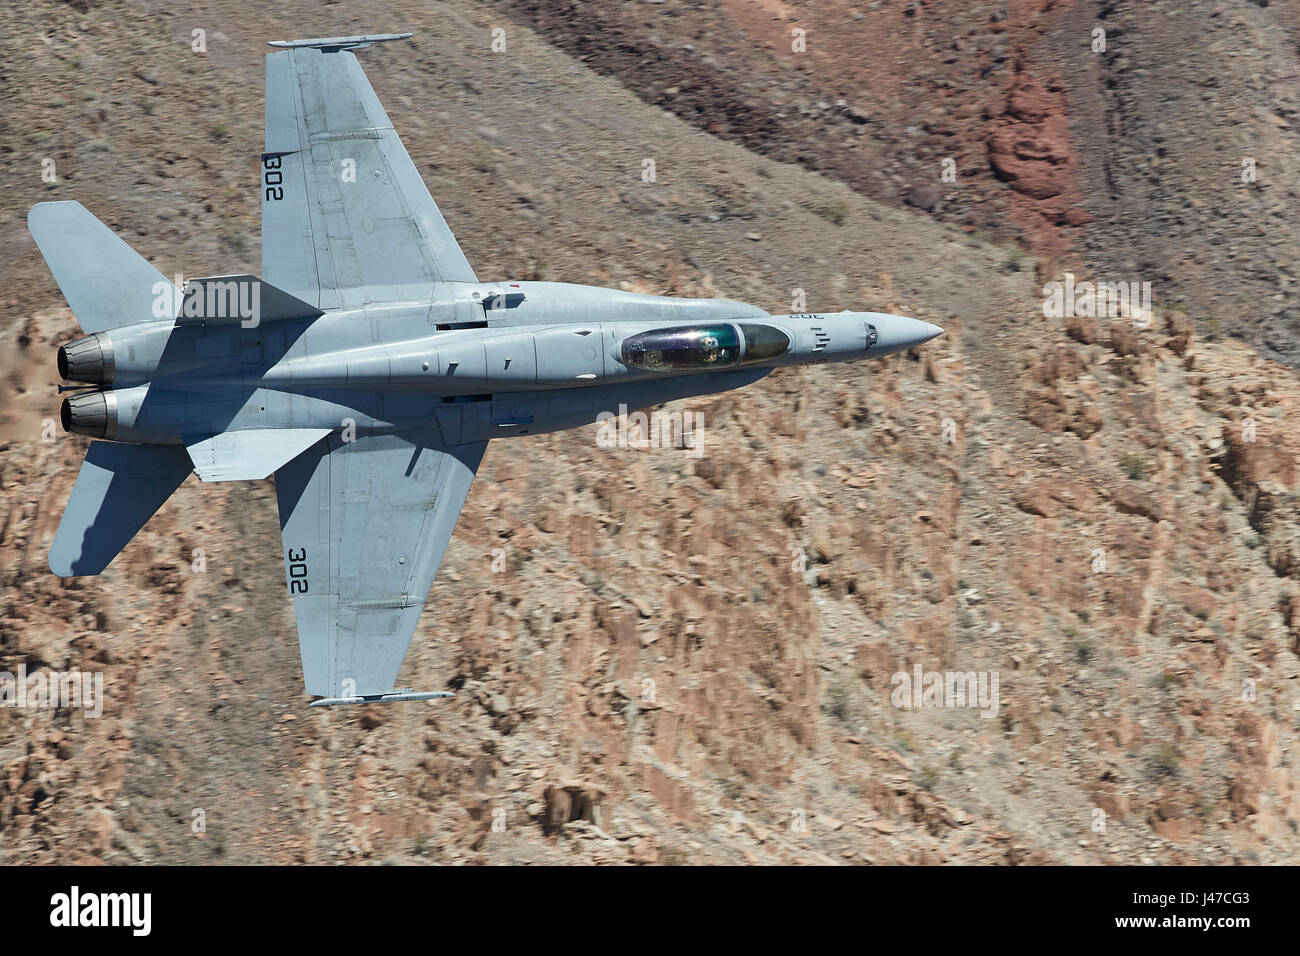 United States Navy F/A-18C, Hornet, Flying At High Speed And Low Level, Through A Desert Canyon. Stock Photo